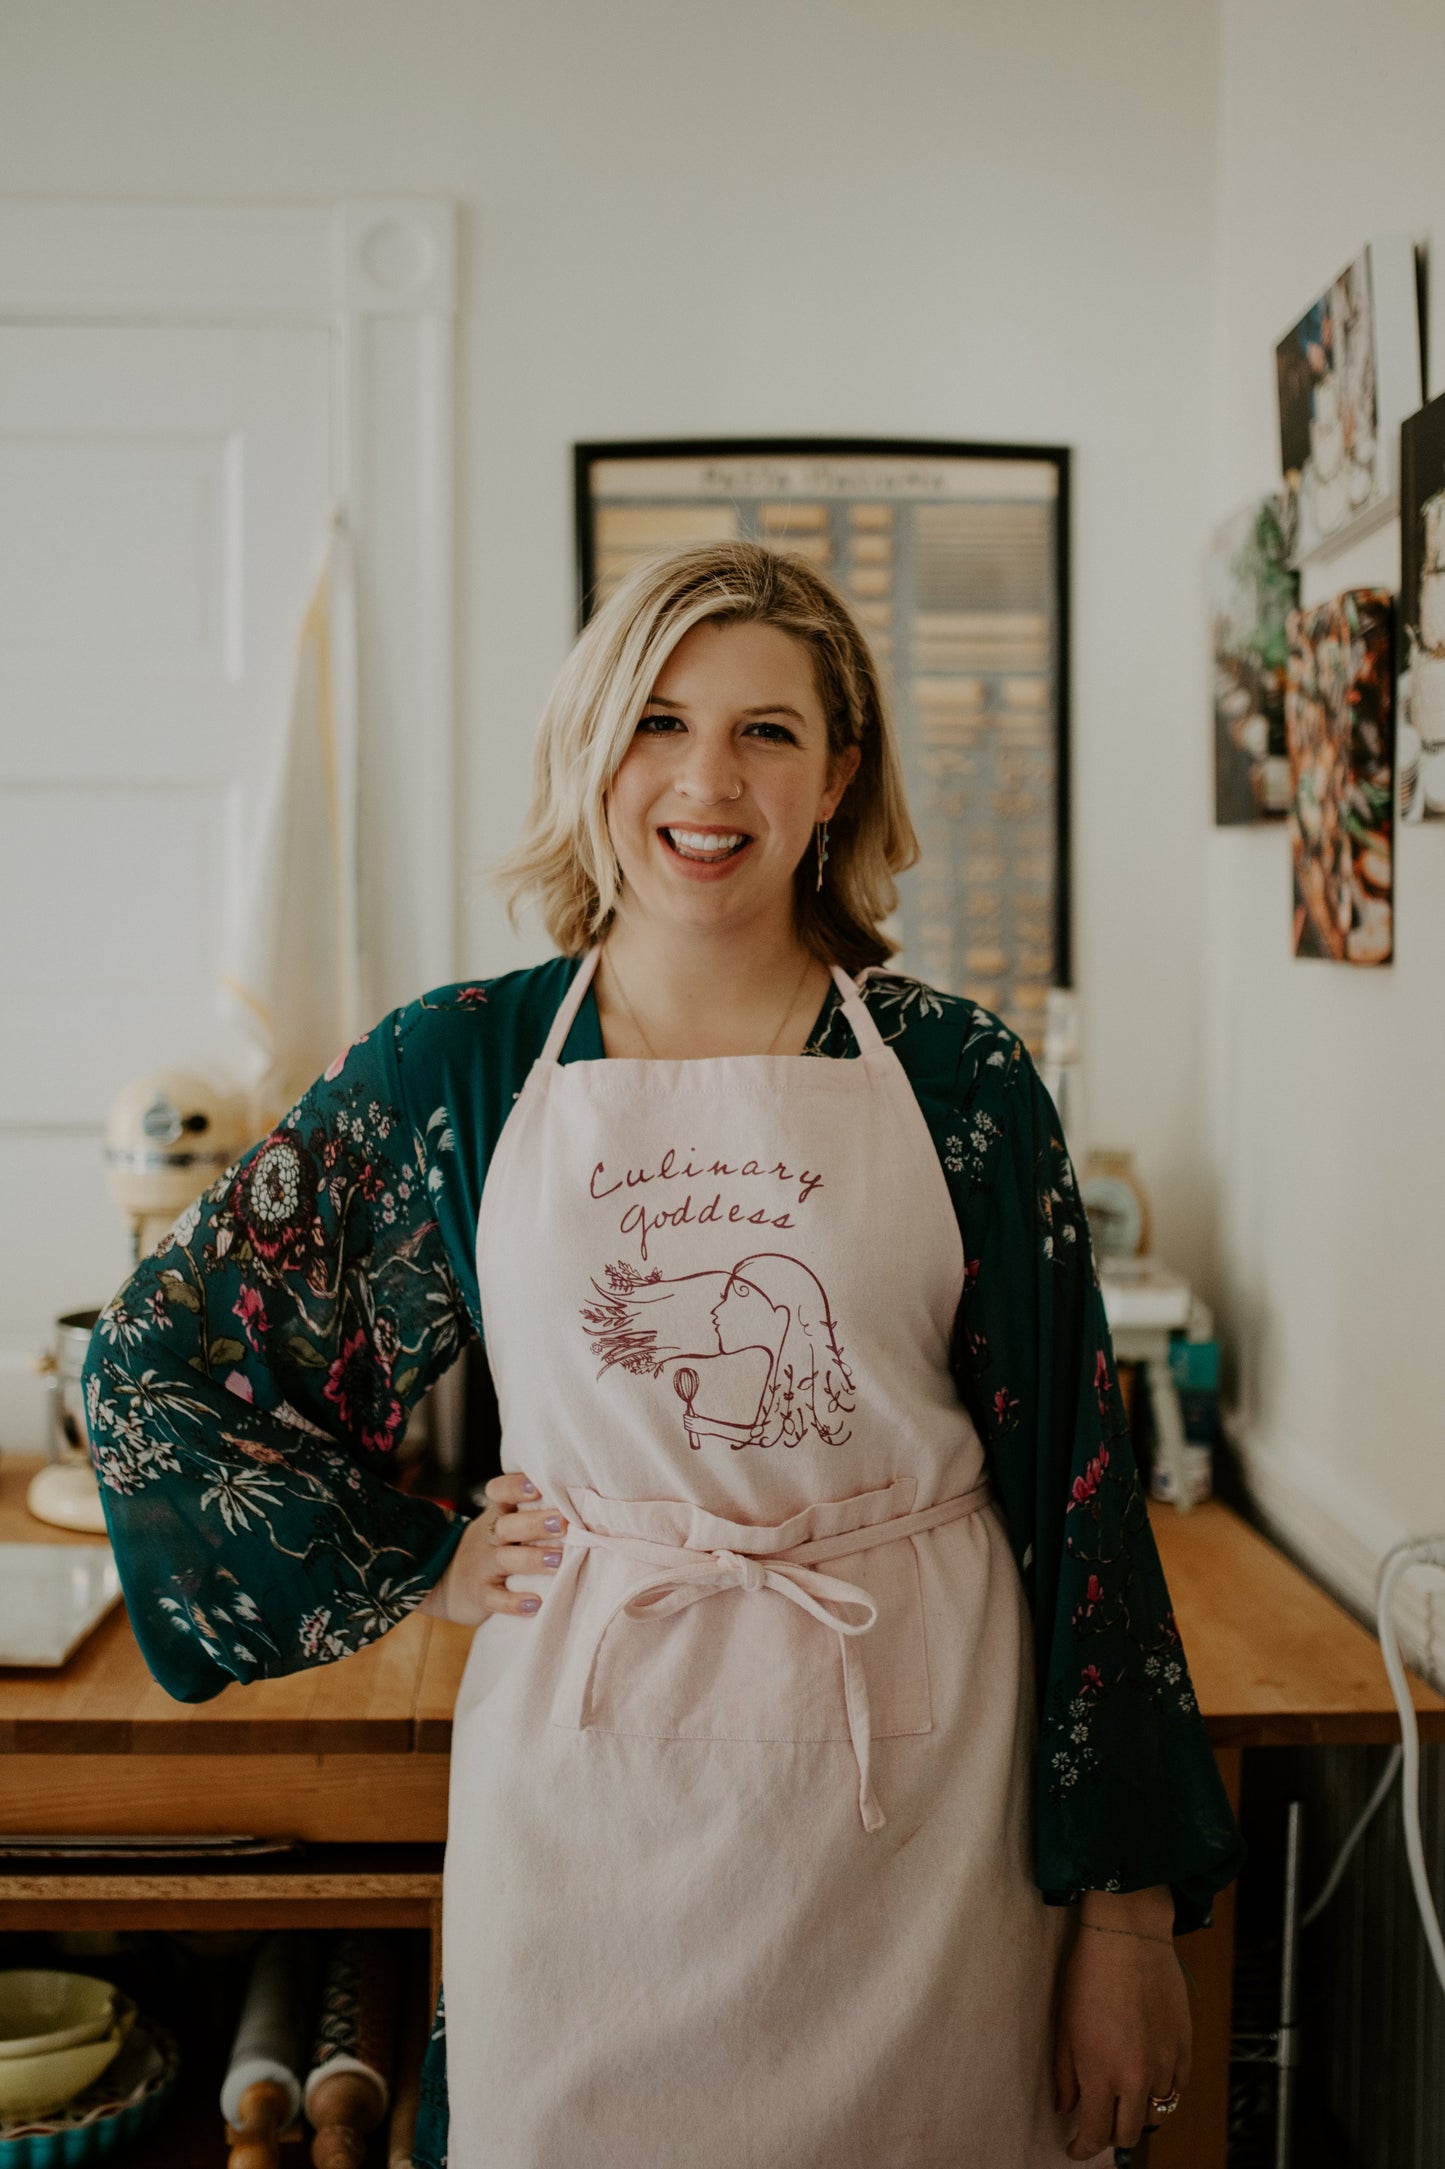 Woman in a pink apron that says "Culinary Goddess" stands in her kitchen